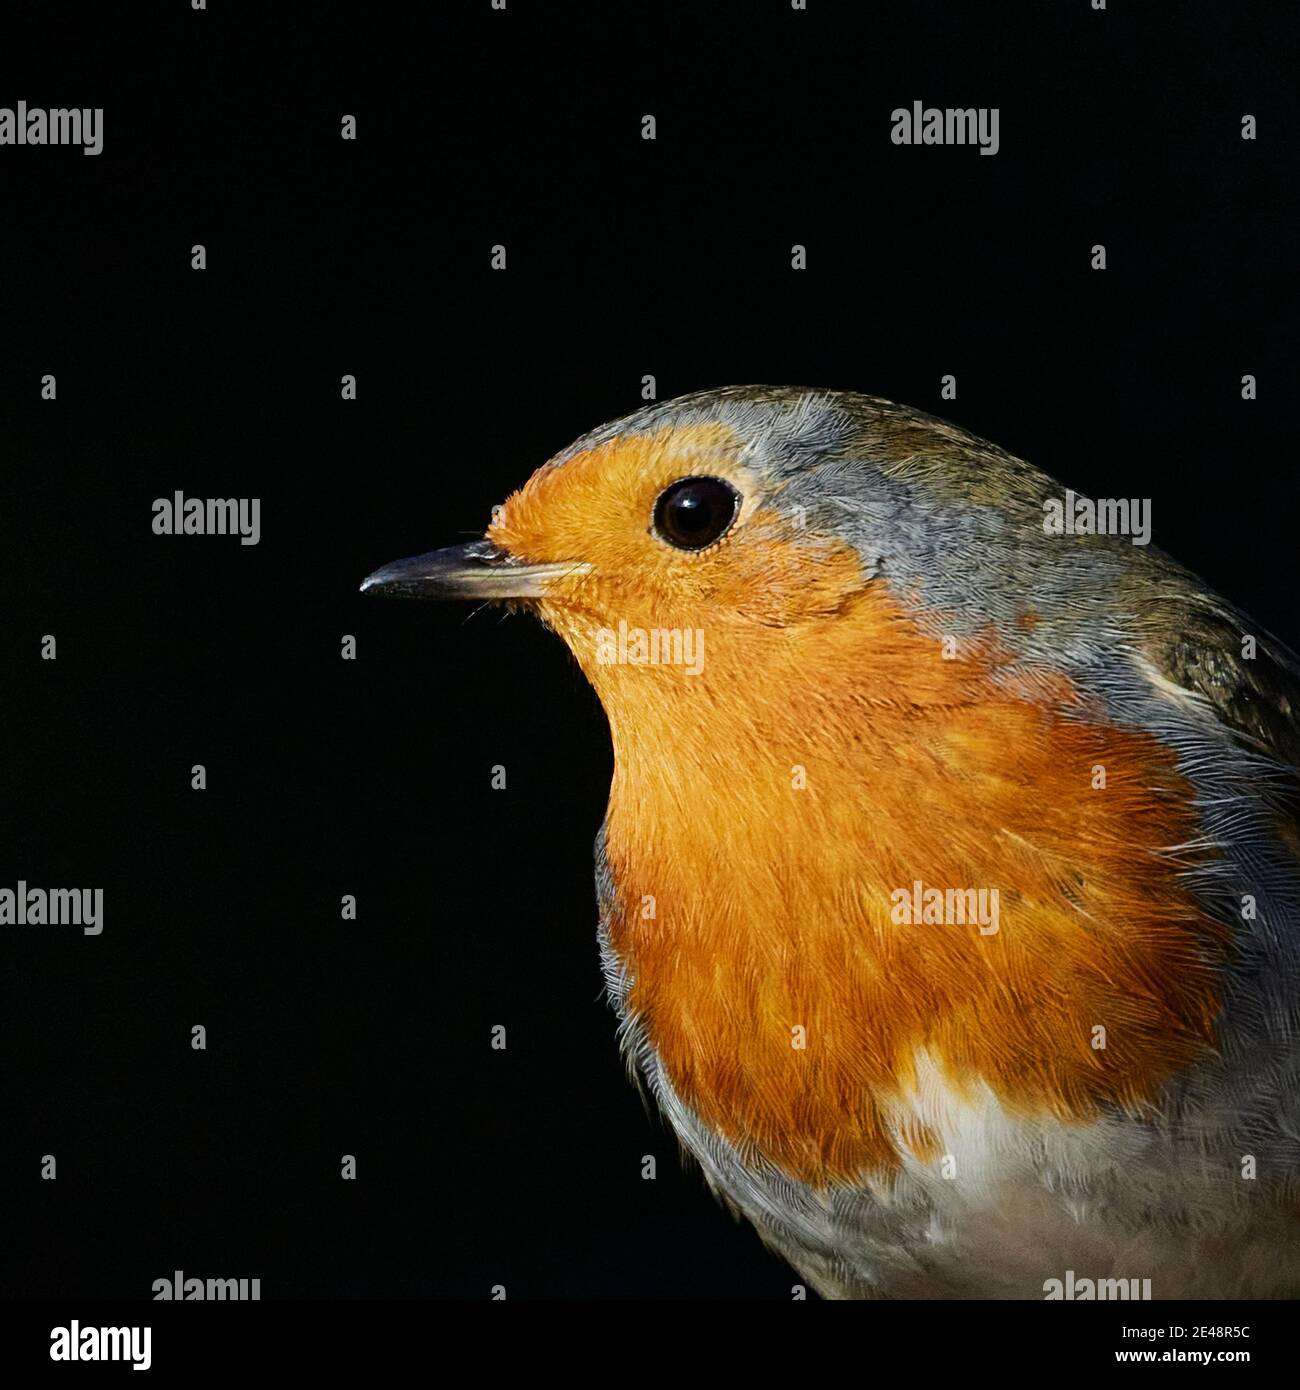 A close up side view of a Robin (Erithacus Rubecula) in the bottom right corner of the frame with a solid black background behind Stock Photo